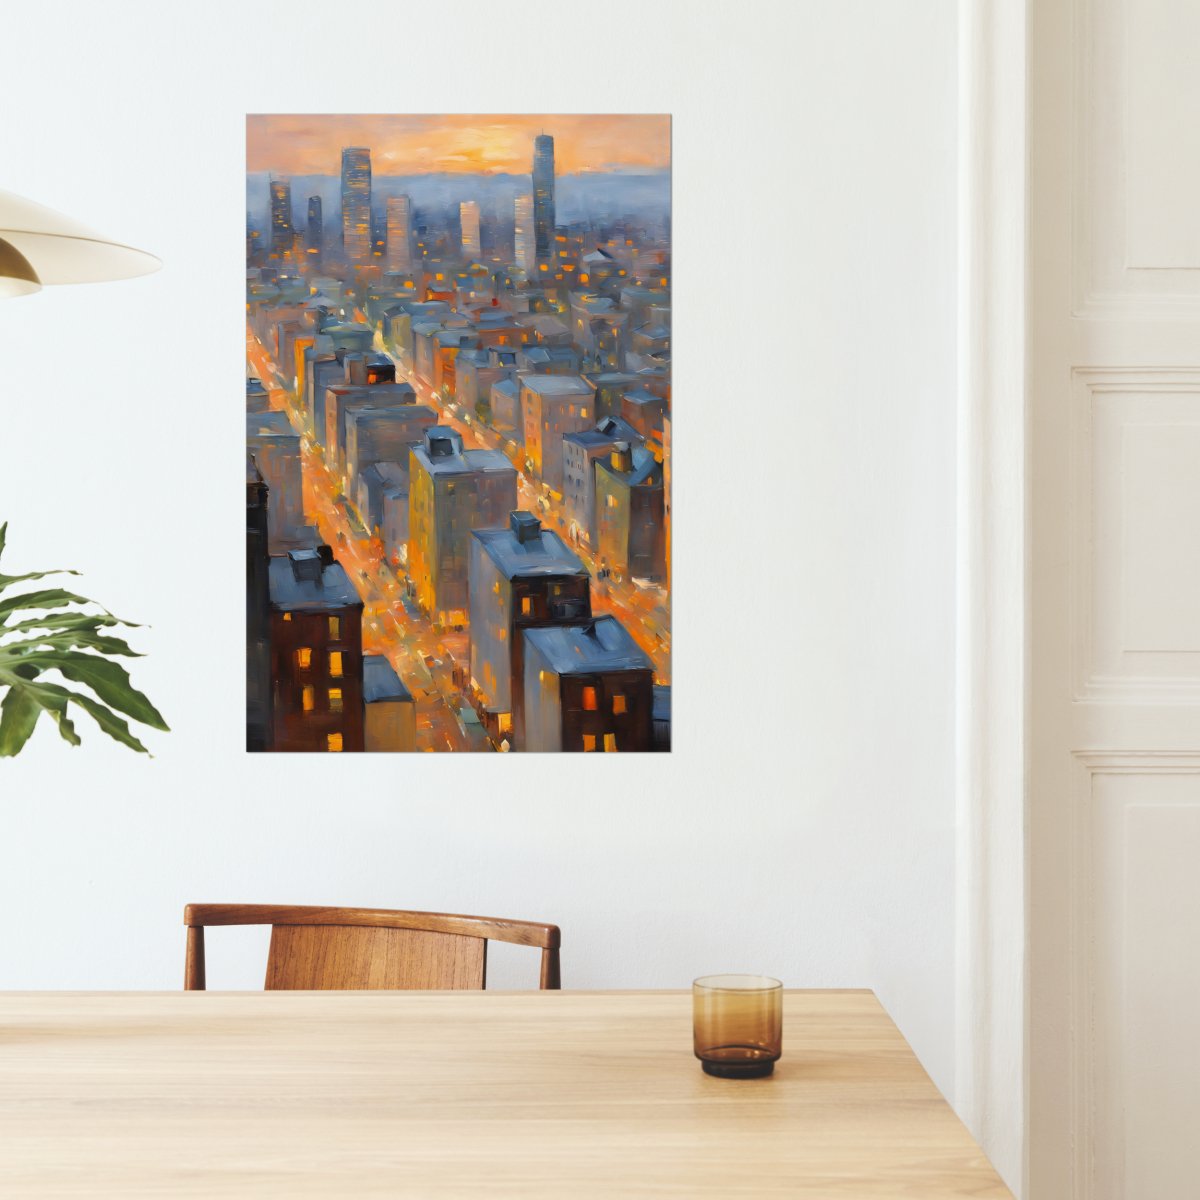 Boston rooftops - Art print - Poster - Ever colorful